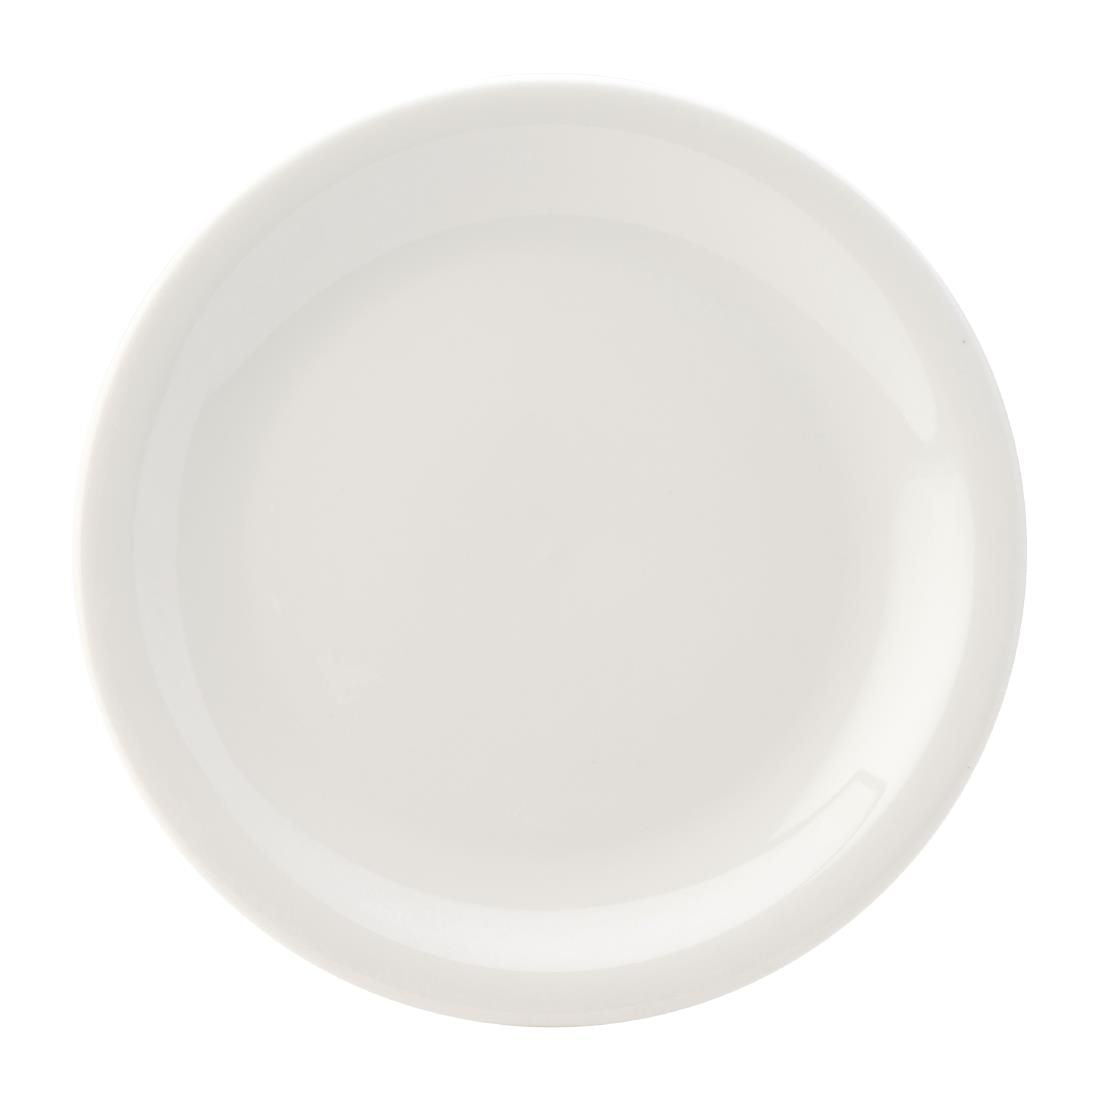 DY318 Utopia Titan Narrow Rimmed Plates White 240mm (Pack of 24)